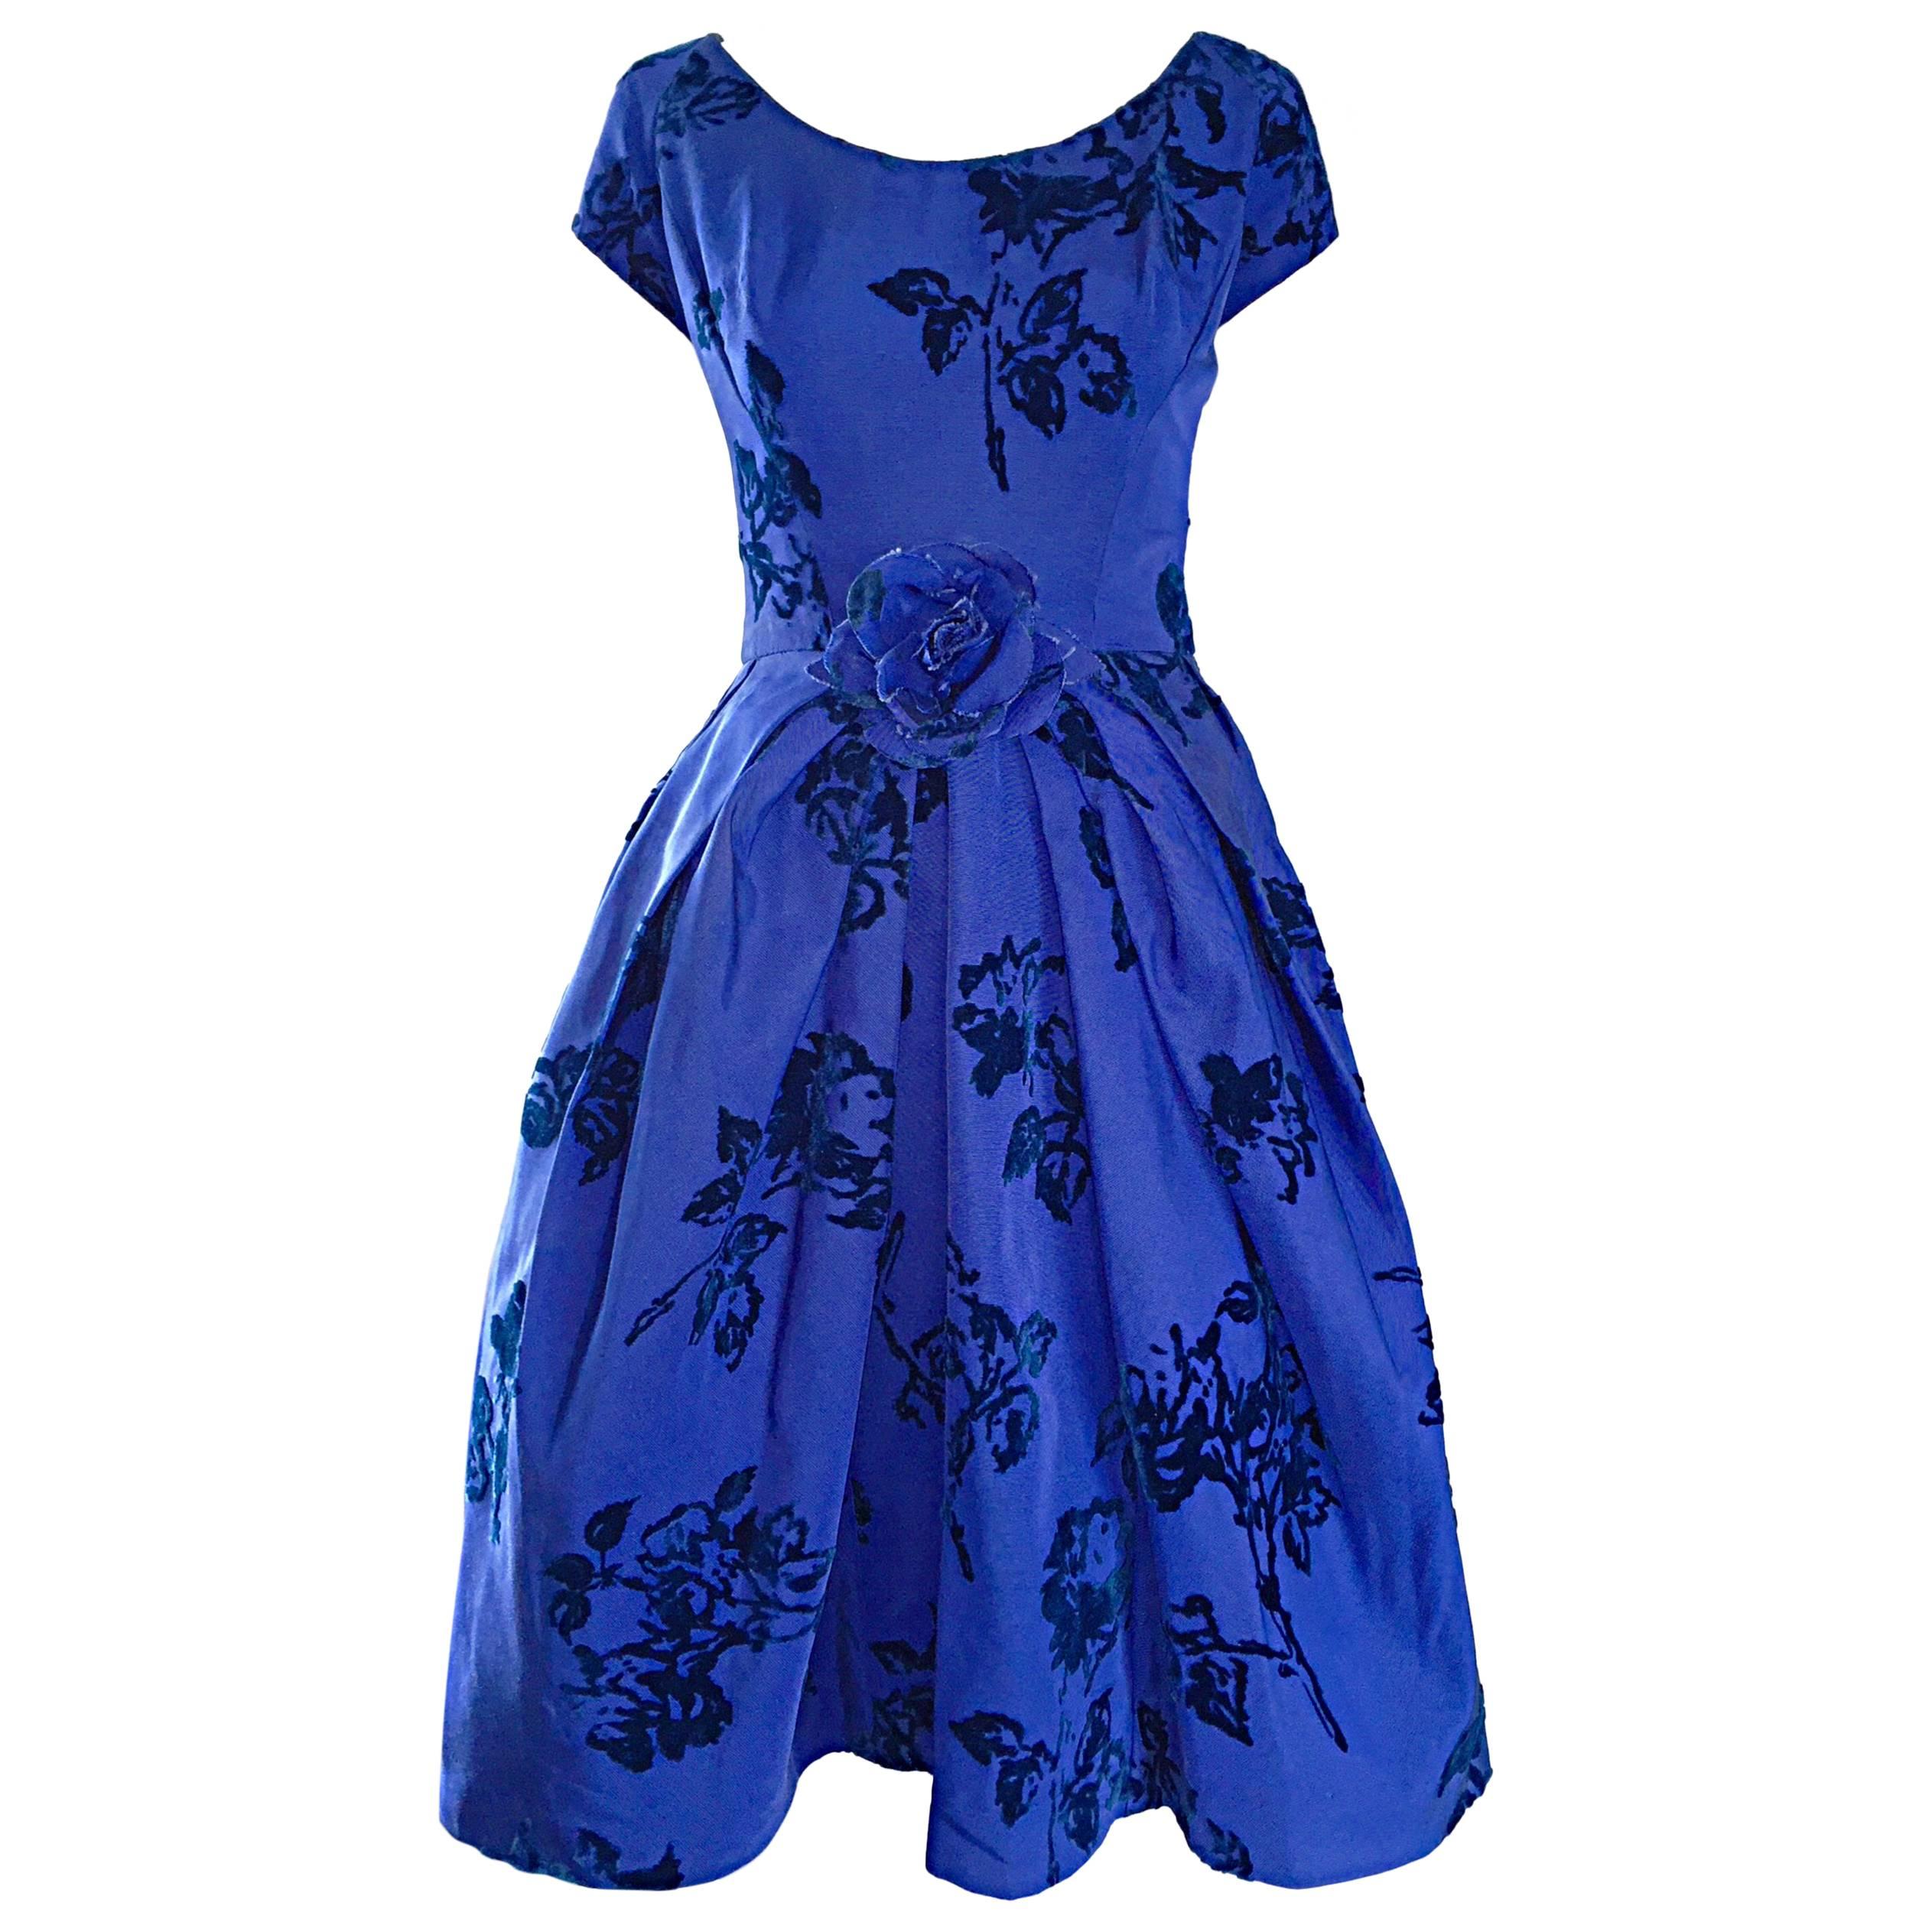 Demi Couture Royal Blue Silk Flower Abstract Vintage Dress, 1950s For Sale